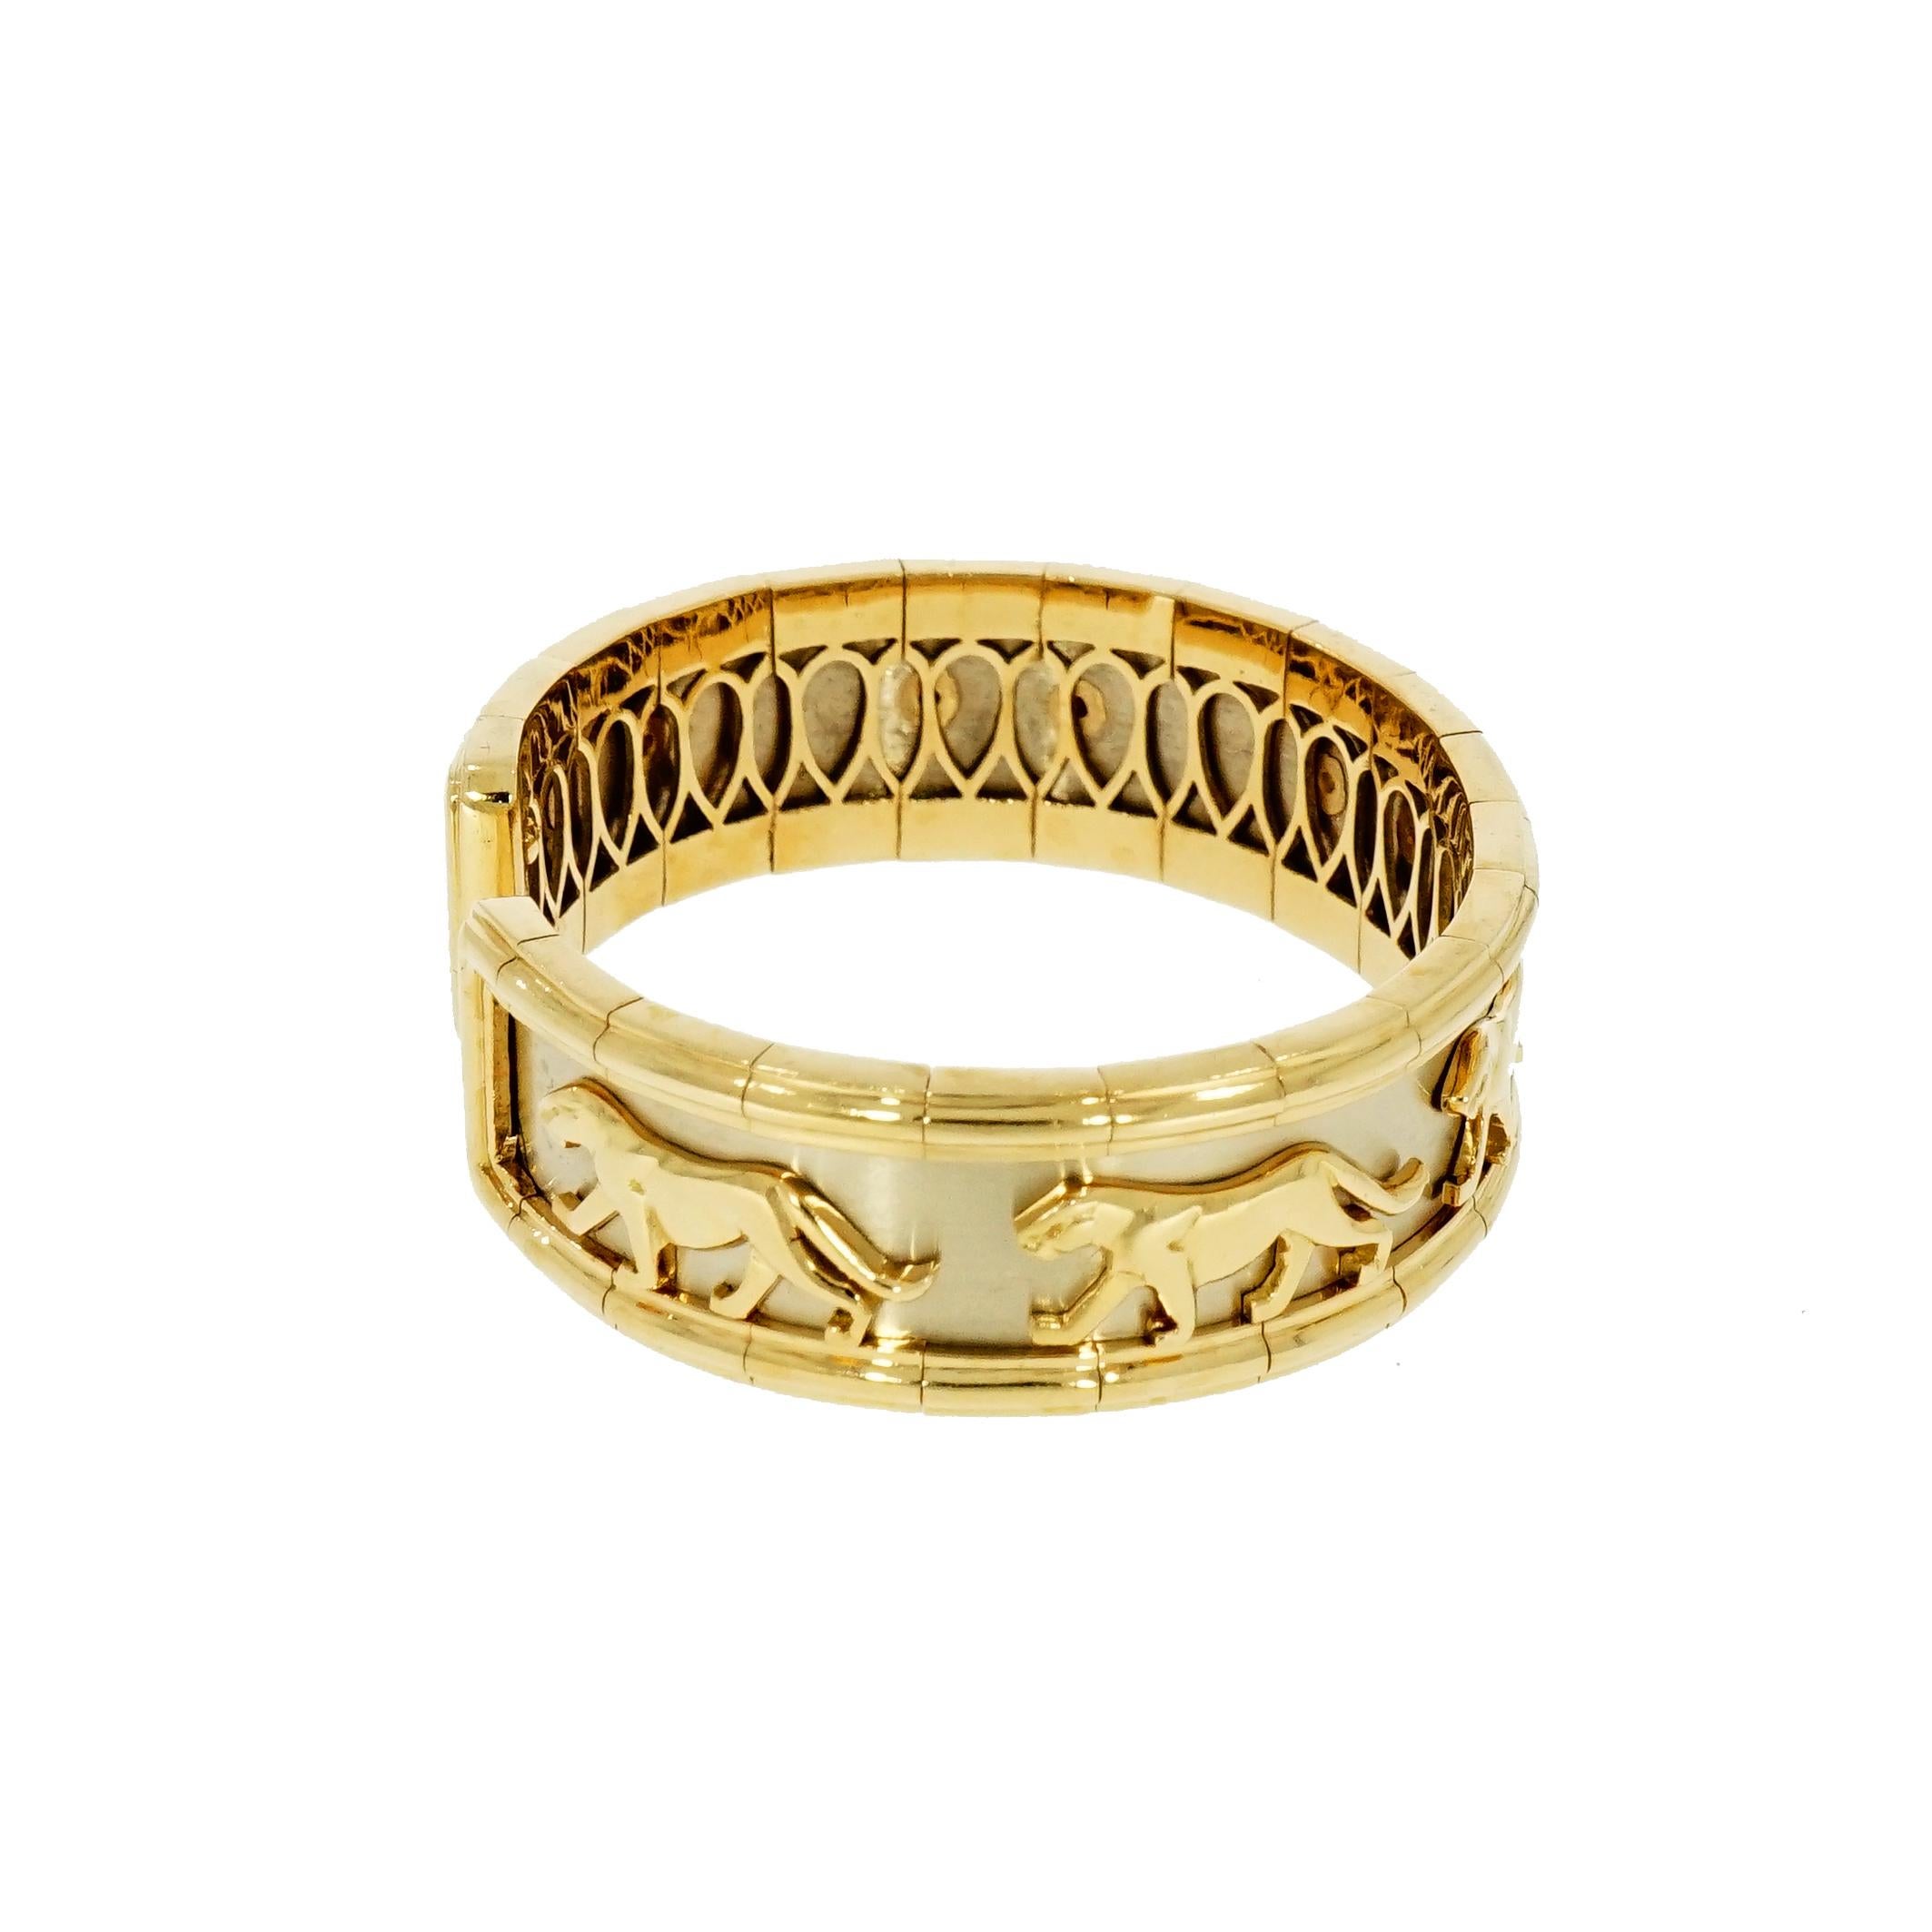 One of the most stylish designs, this classic Panther bracelet. 
Crafted without compromising on quality, a solid 18k White and Yellow Gold.
Specifically designed for those who want to feel different.
Measures 6.5 inches in diameter and weighs 83